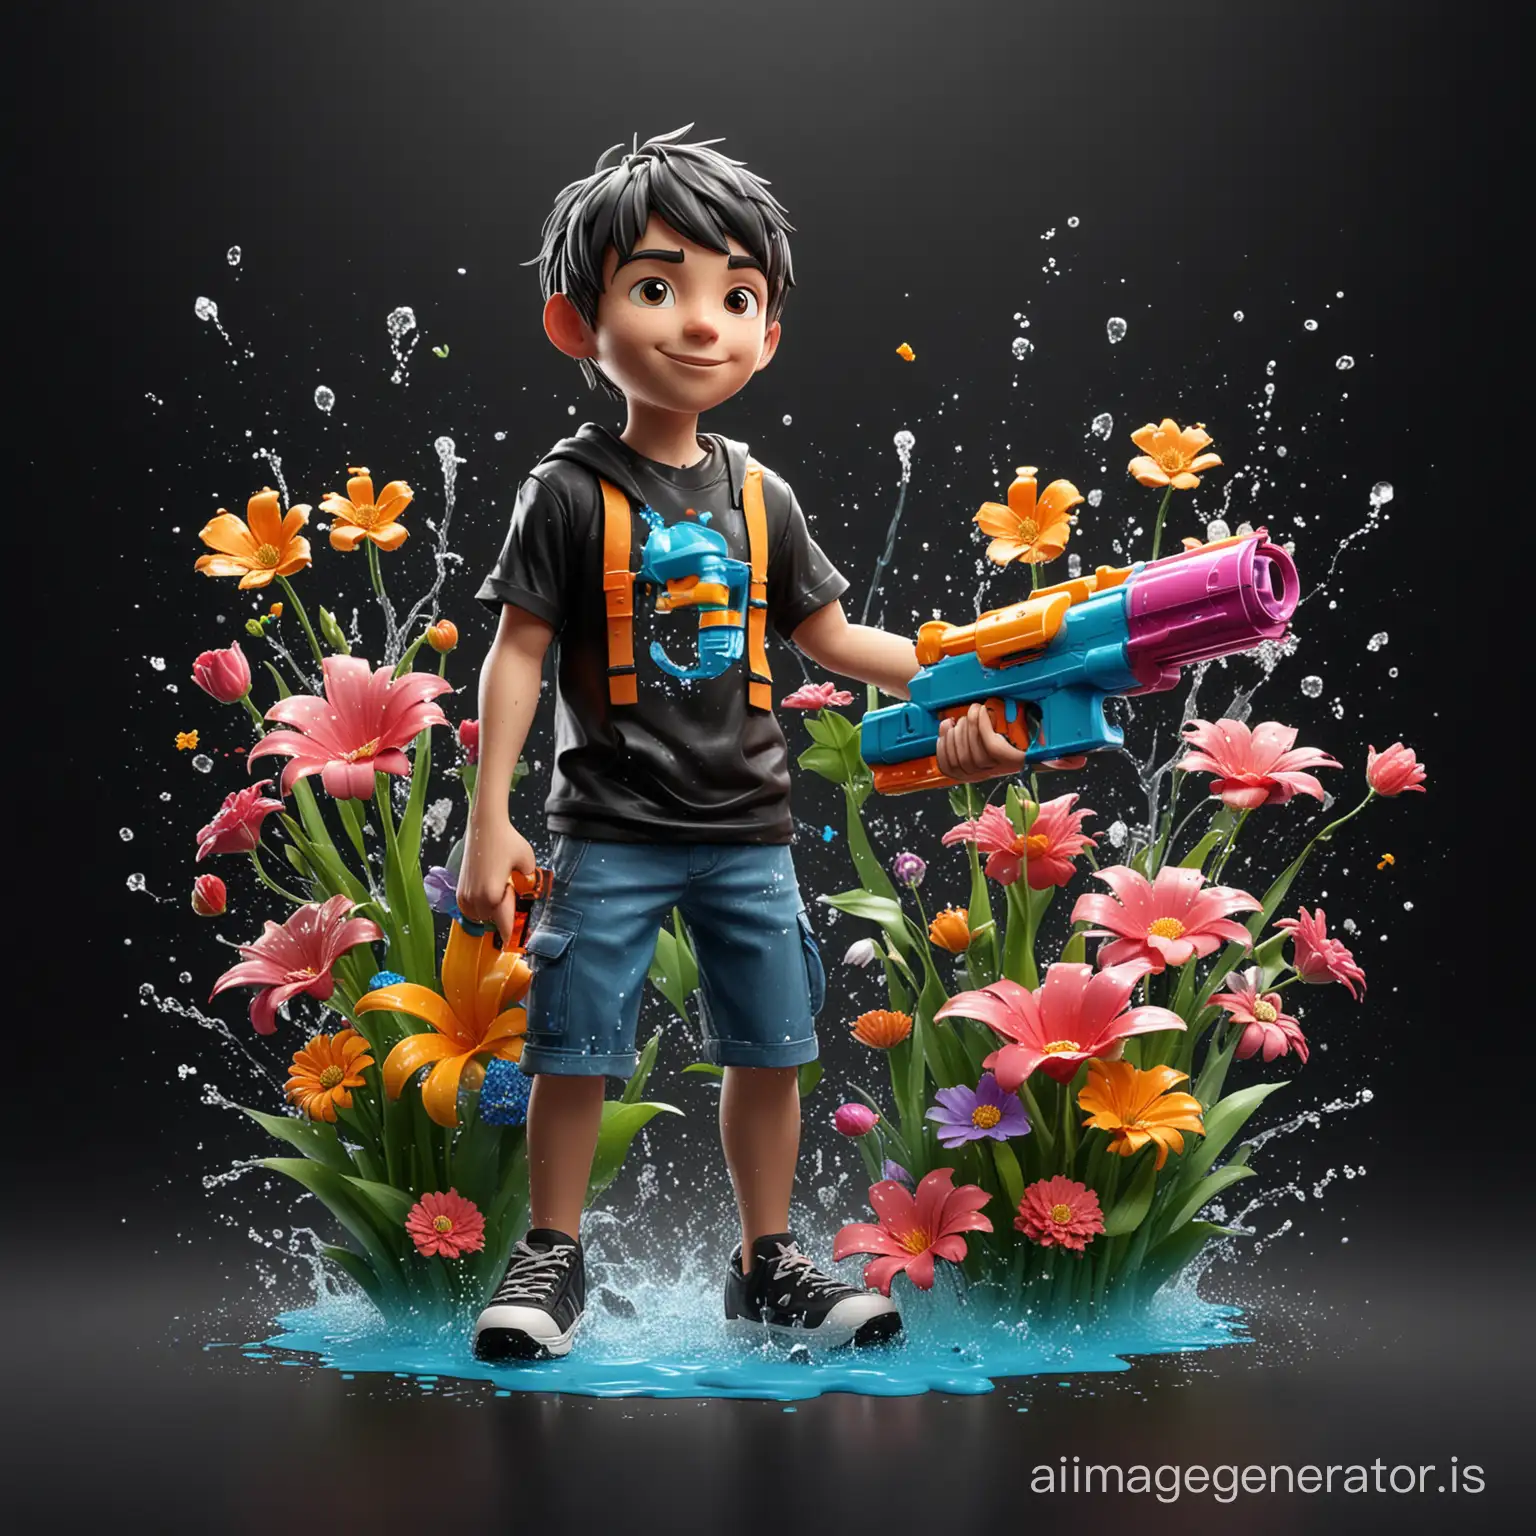 3D logo design, front black background, boy wearing casual clothes holding a water gun, surrounded by flowers and water splashes